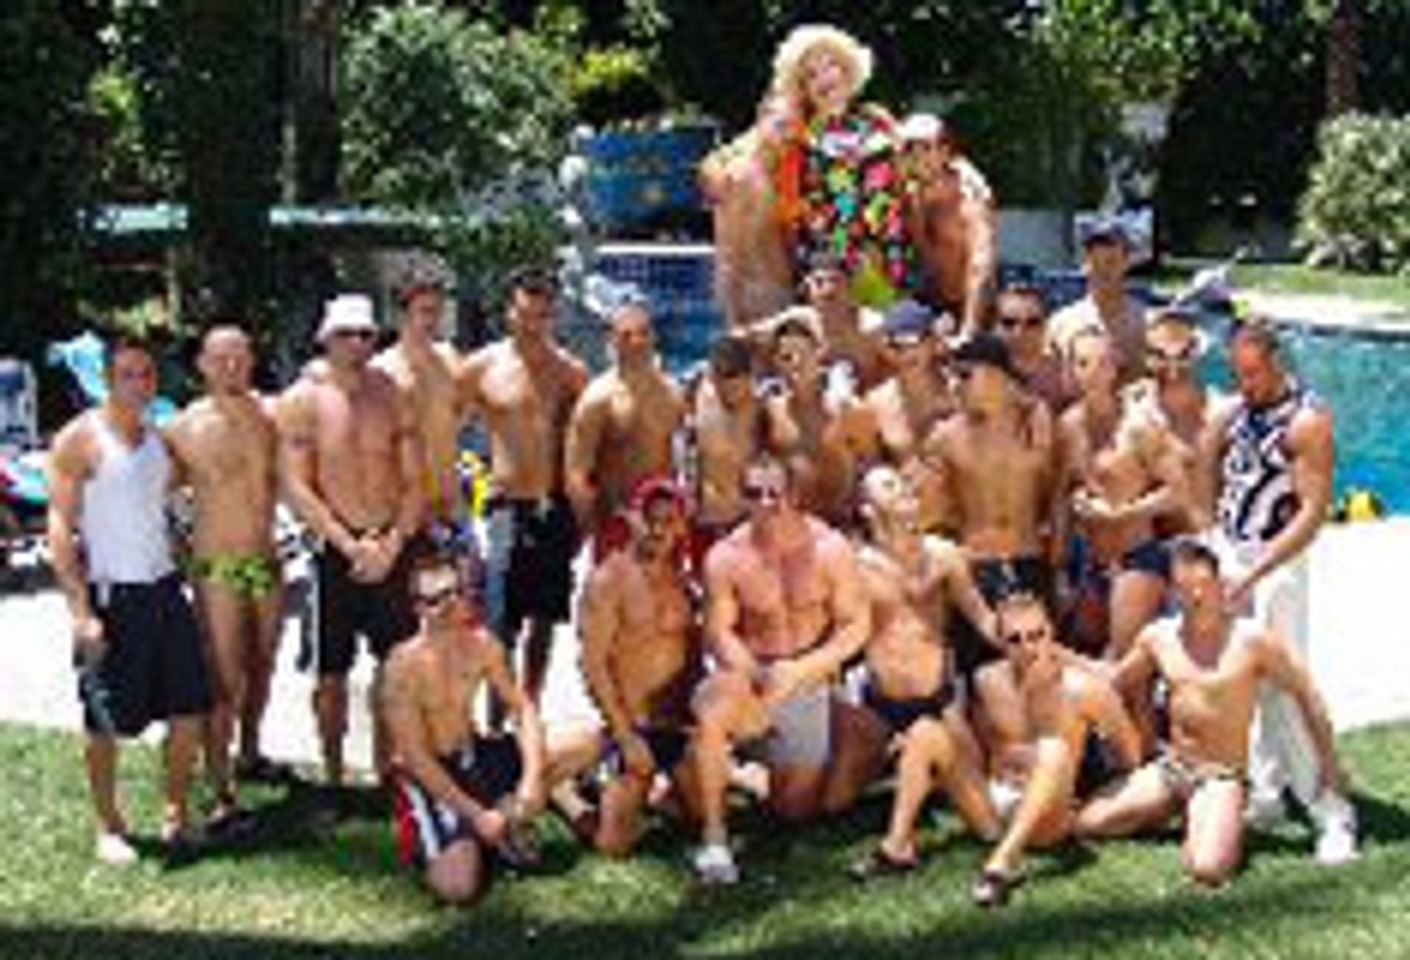 Bad Boys Pool Party Raises $64K to Fight AIDS